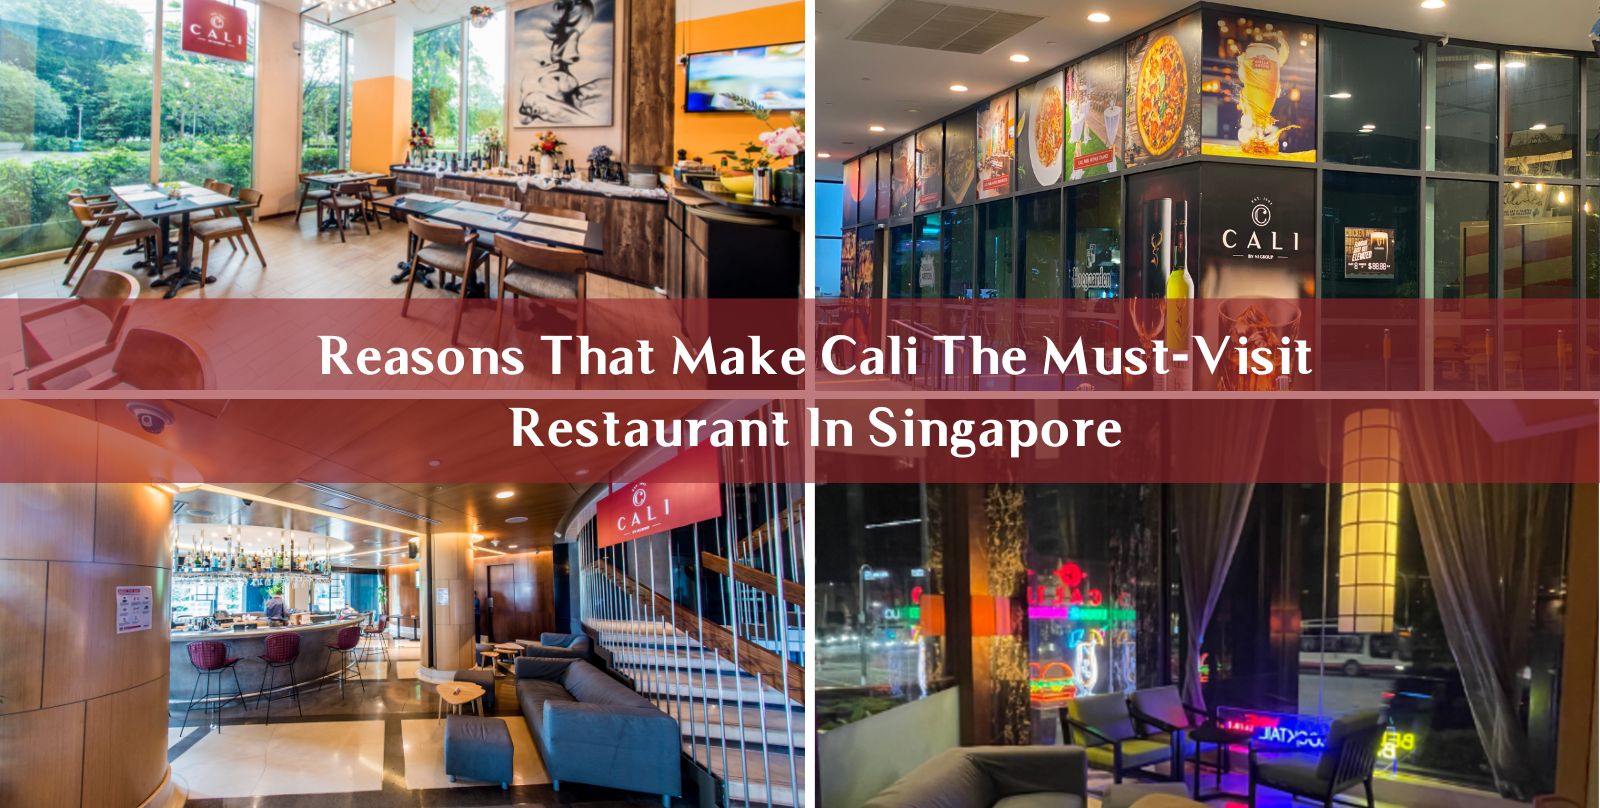 Reasons that make Cali a must visit restaurants in Singapore